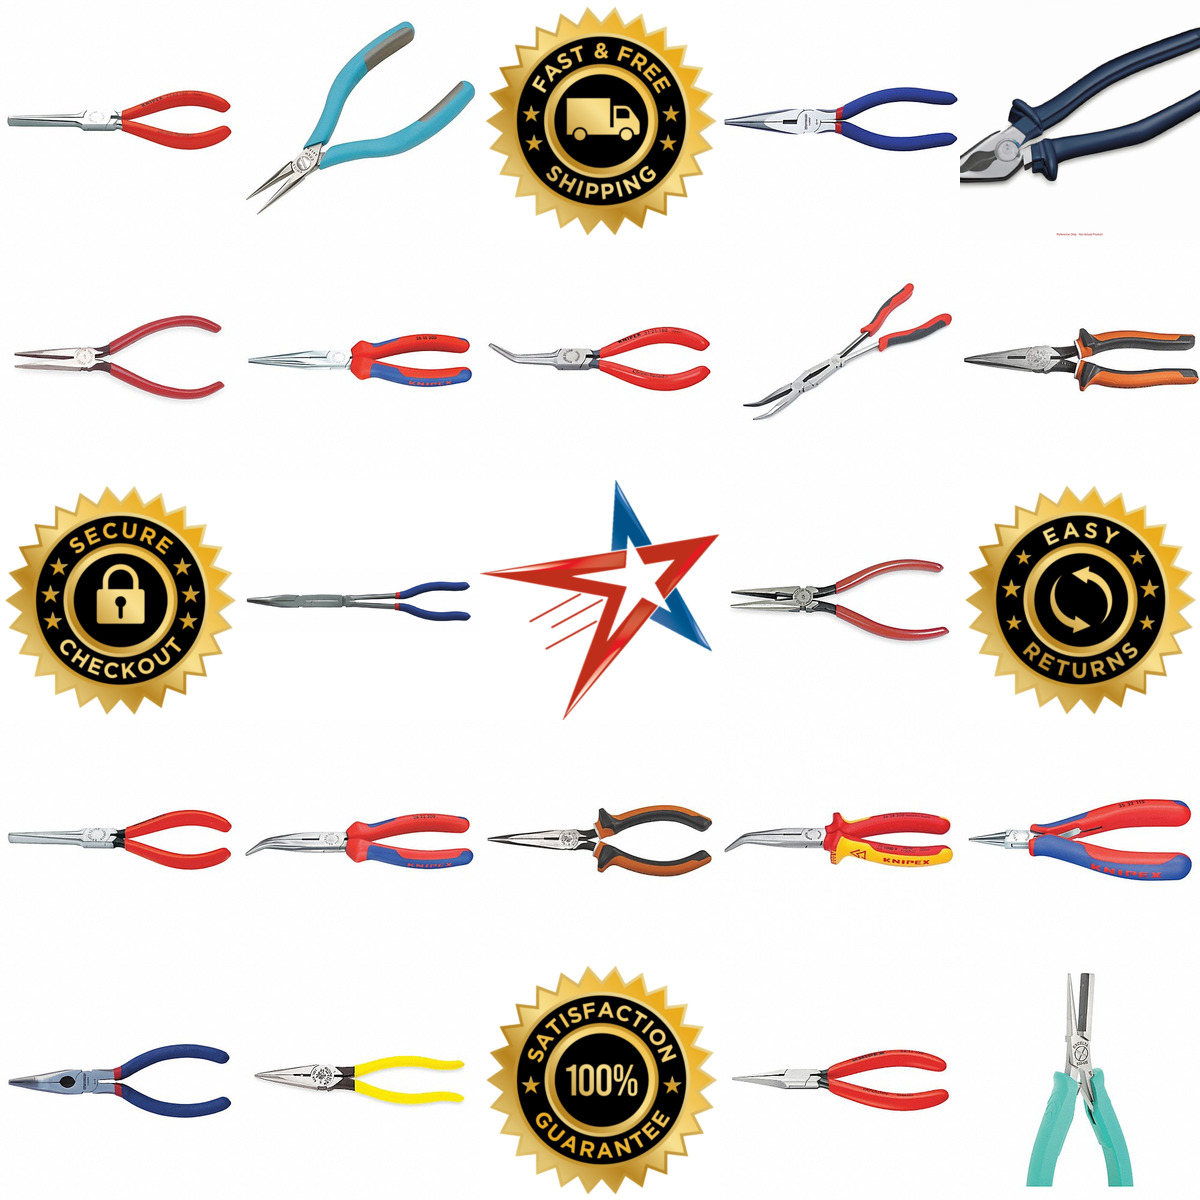 A selection of Needle Bent and Flat Nose Pliers products on GoVets